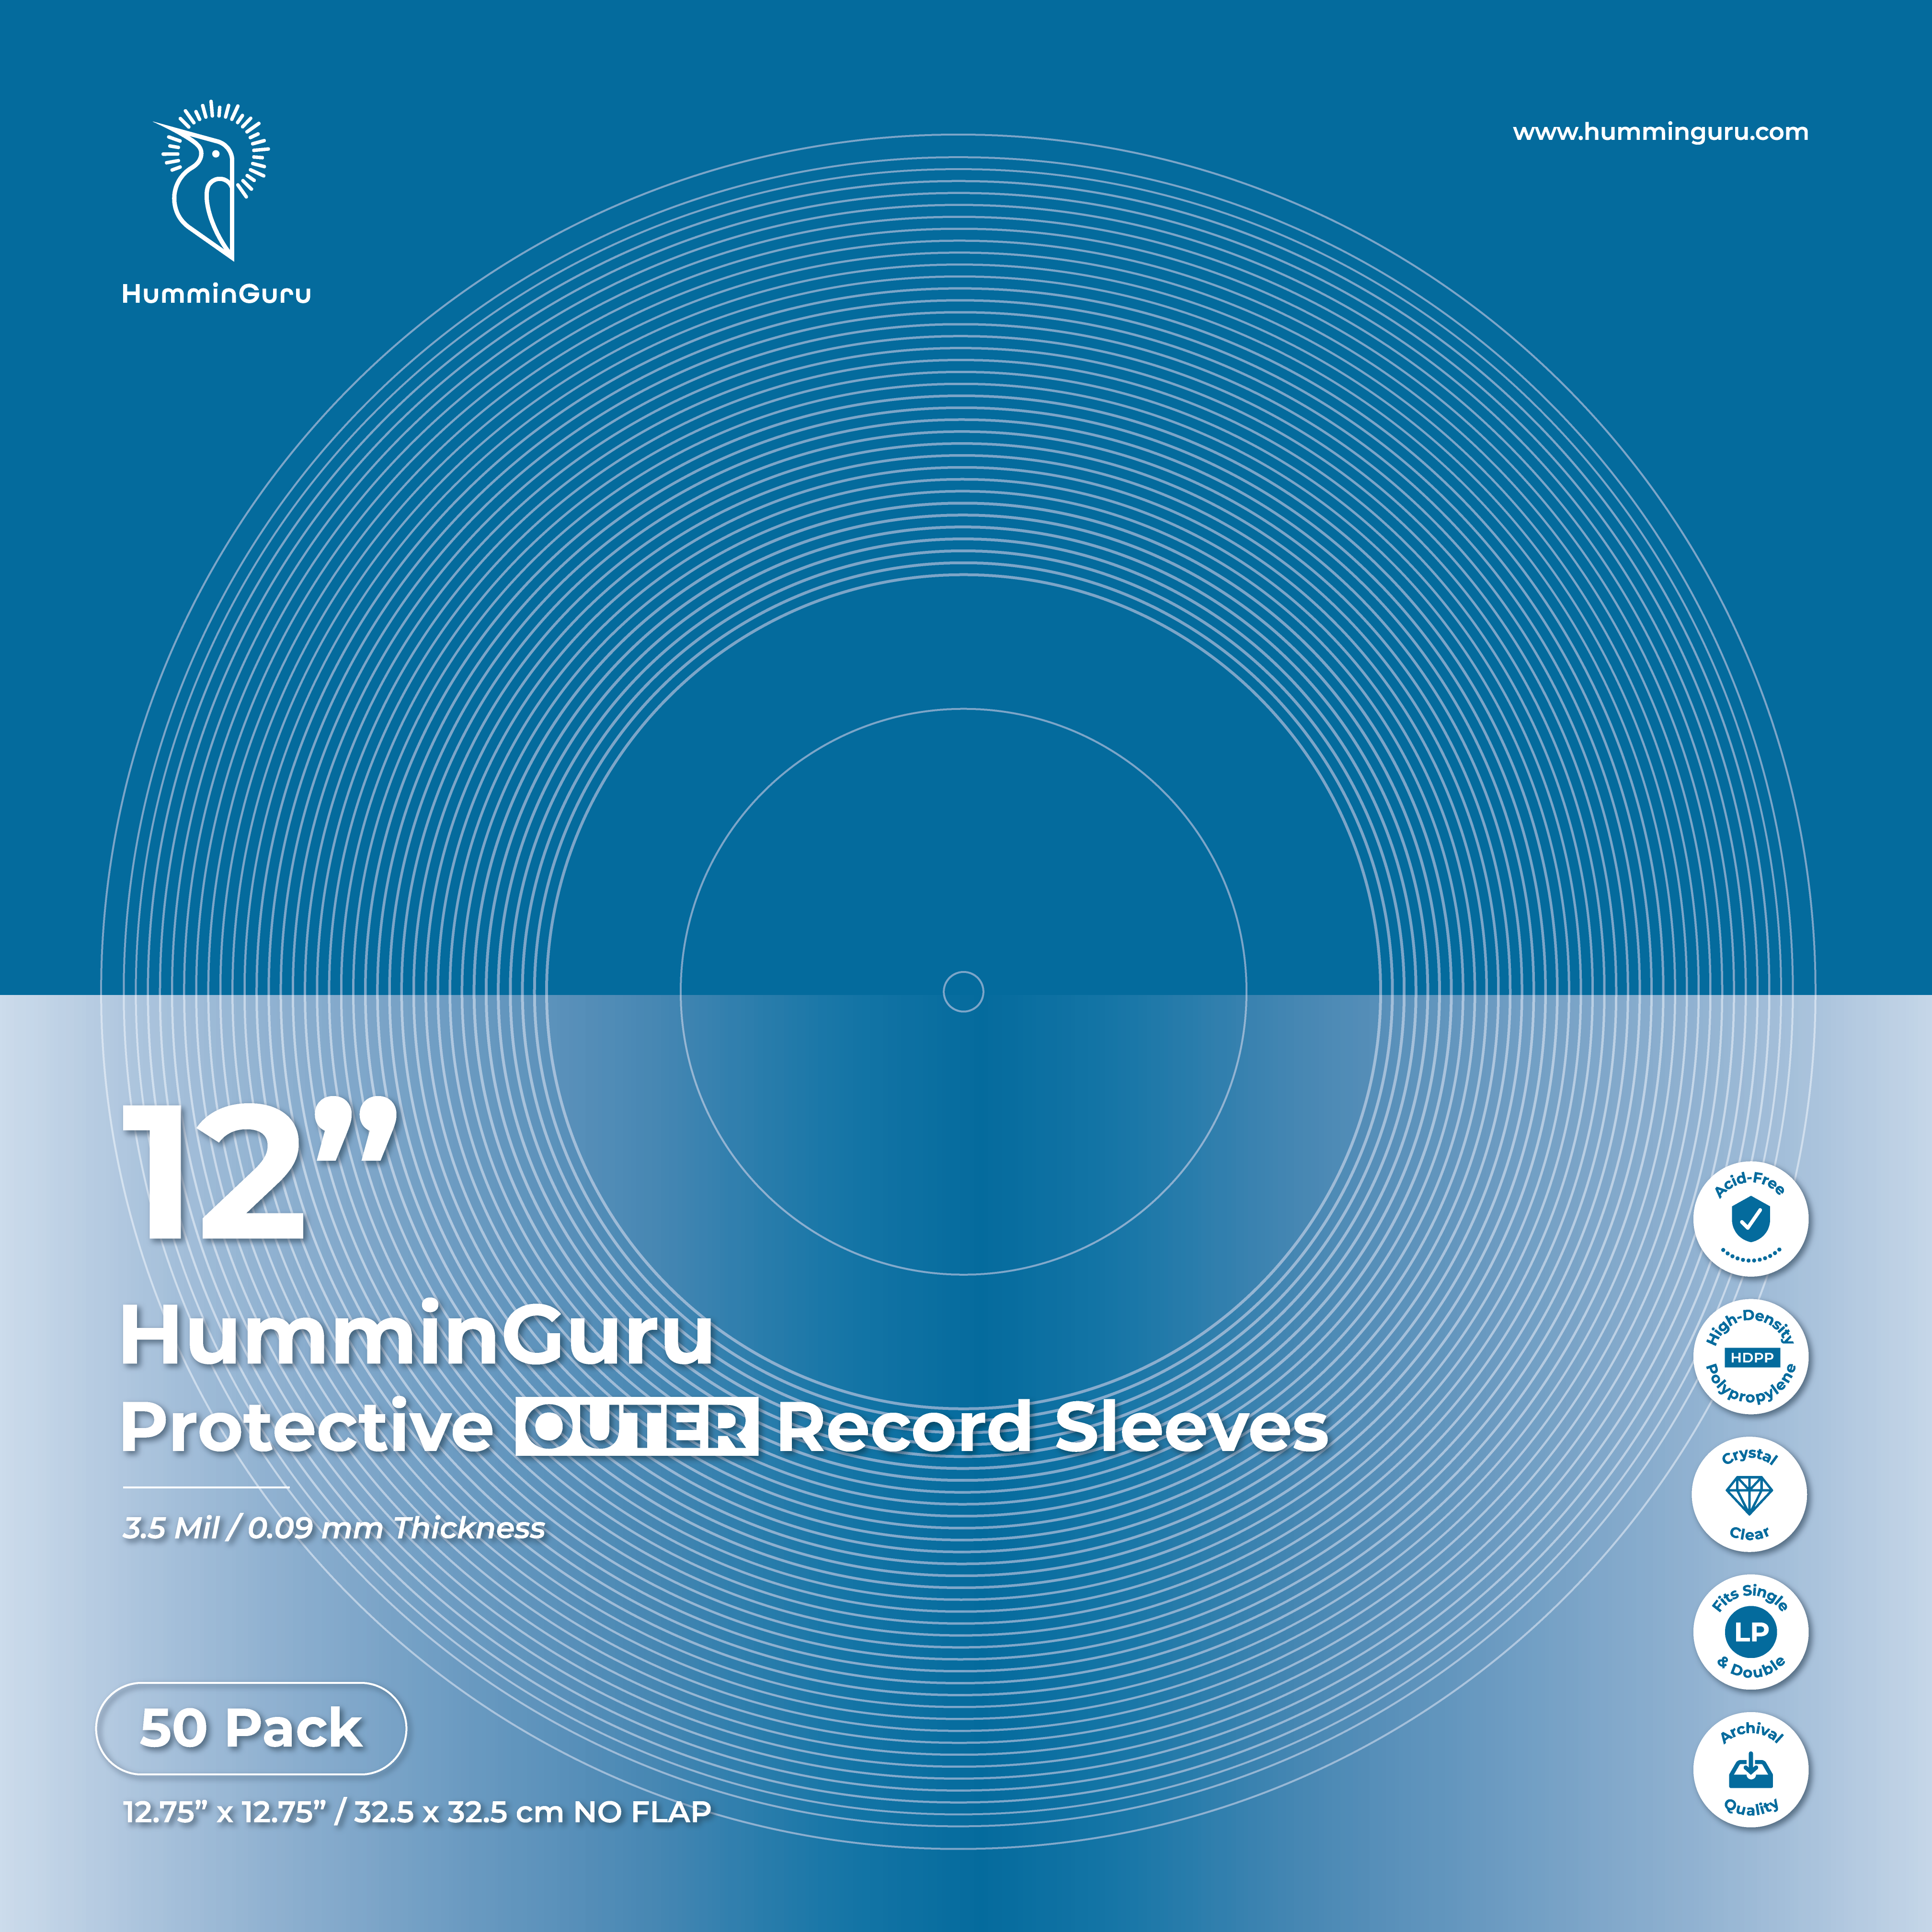 HumminGuru 12 Protective Outer Record Sleeves (50 pack)